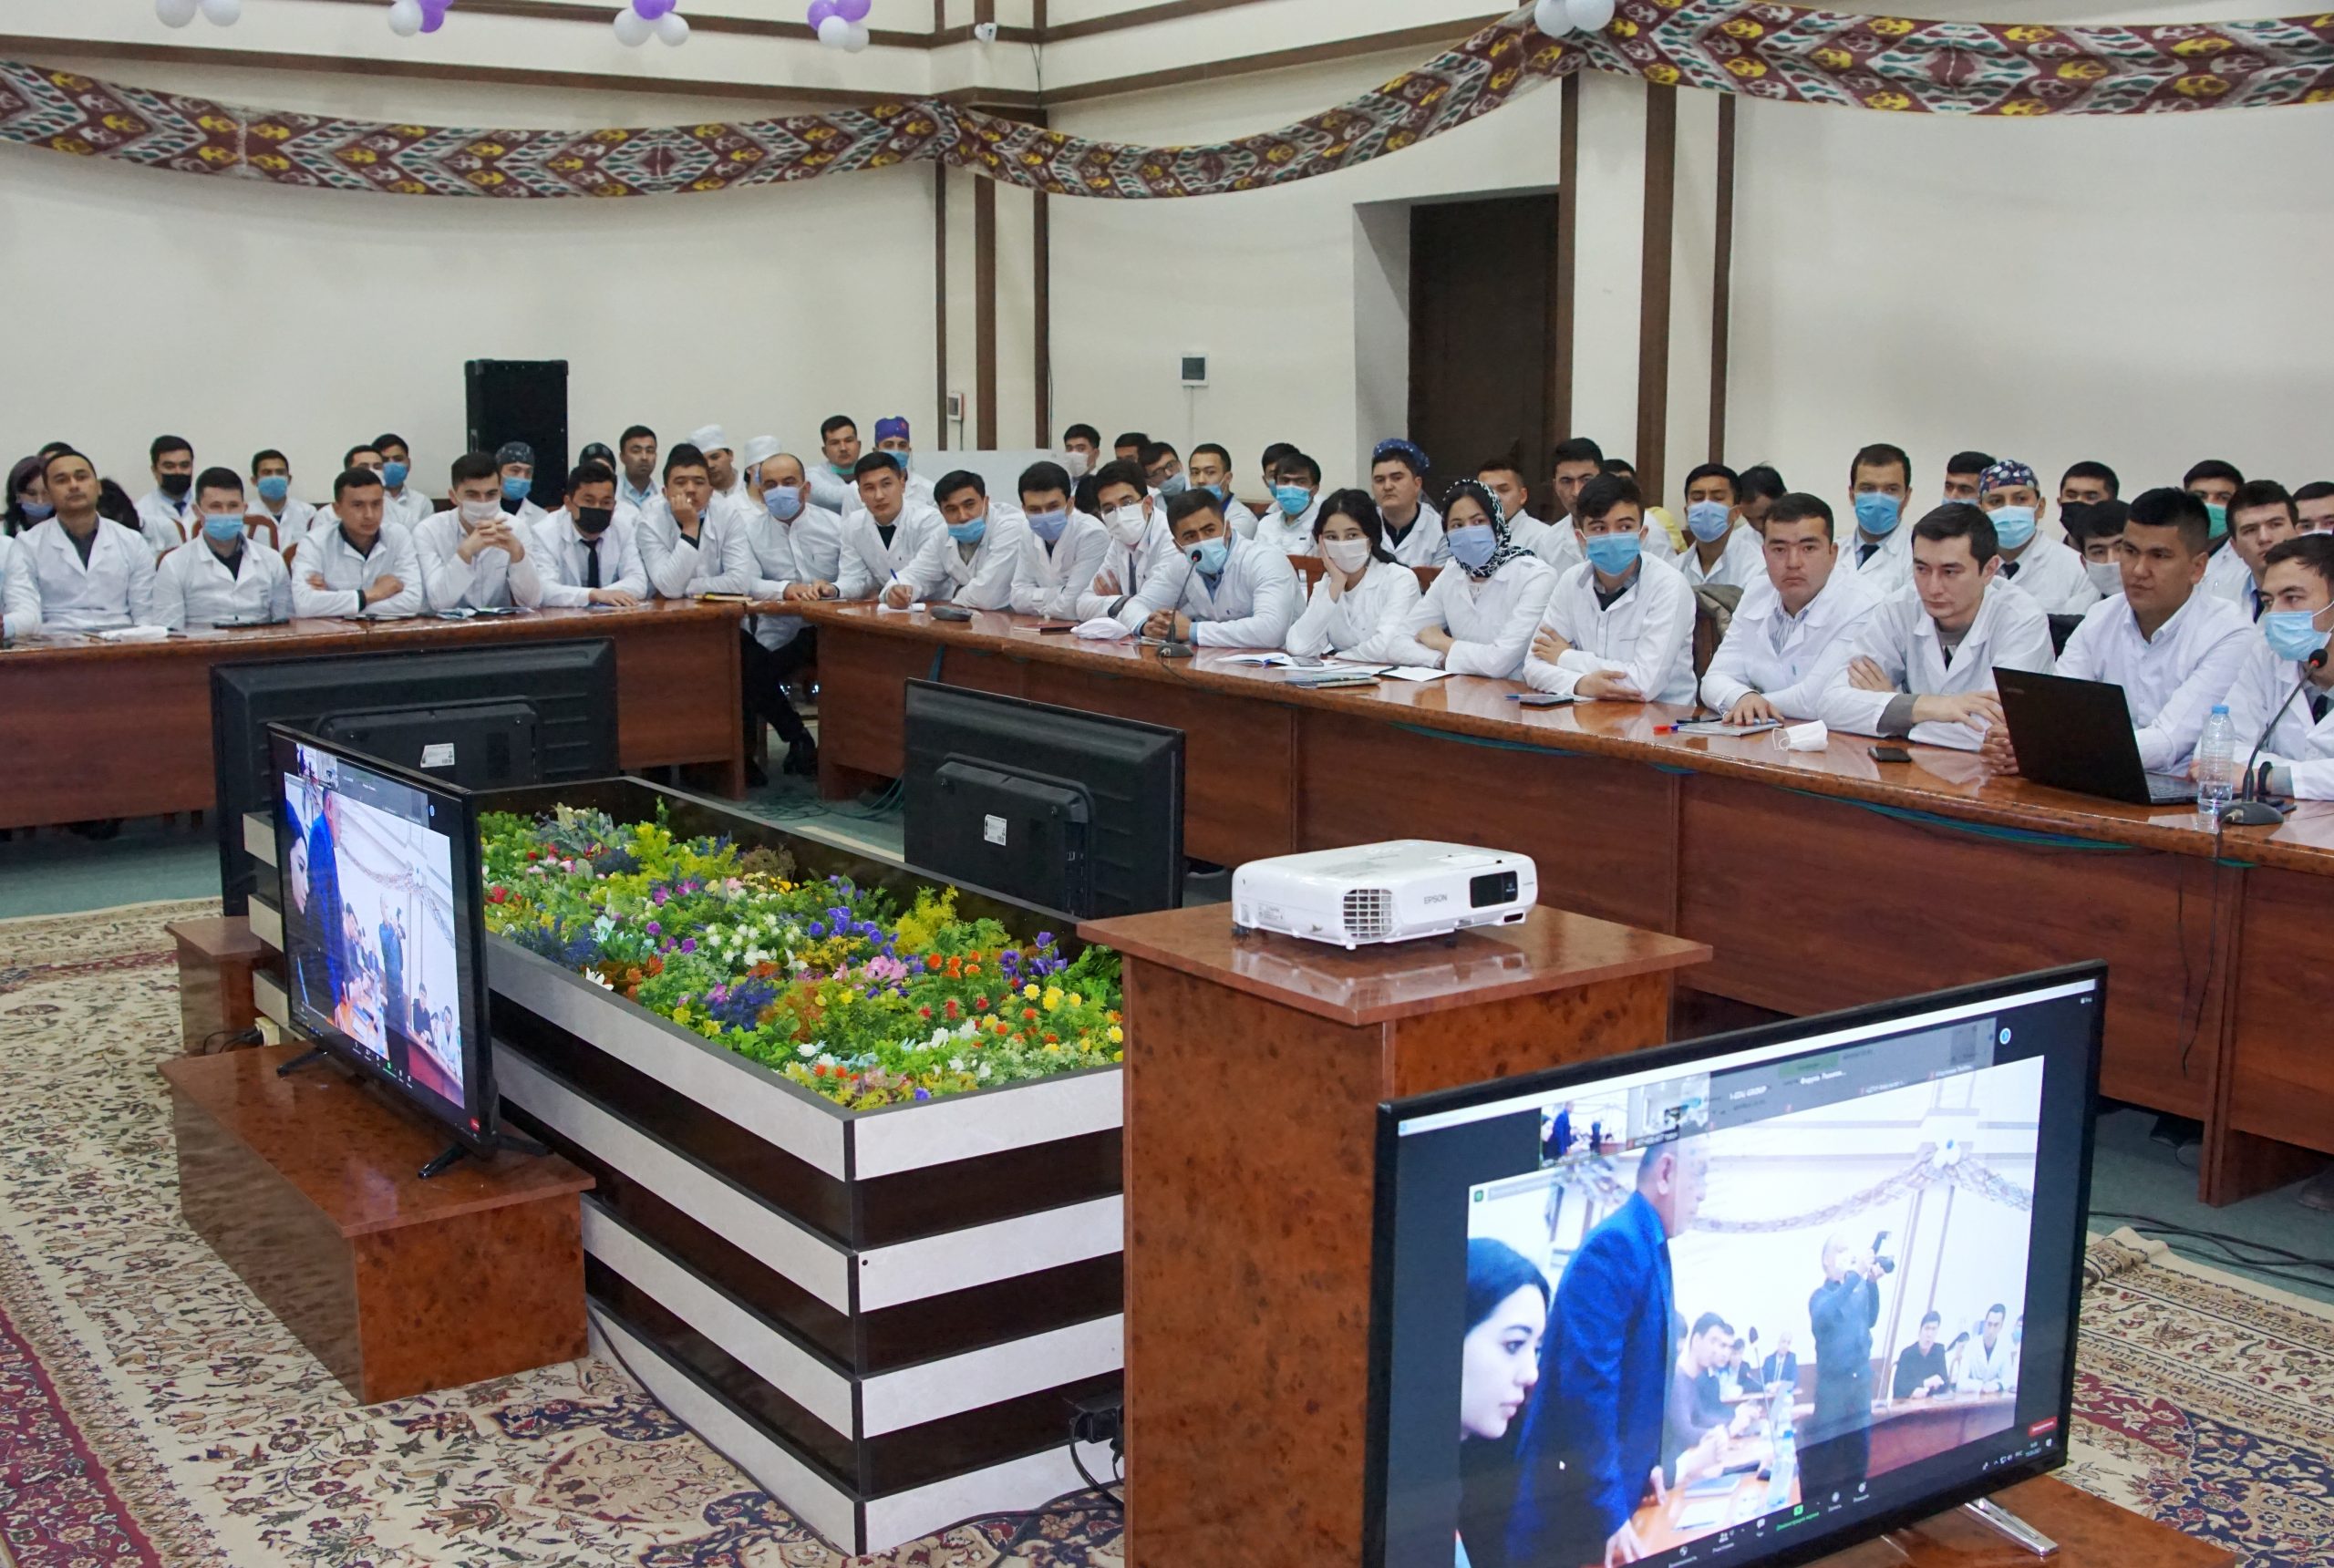 ANDIJAN STATE MEDICAL INSTITUTE HOSTED A CONFERENCE IN COOPERATION WITH TASHKENT STATE DENTAL INSTITUTE